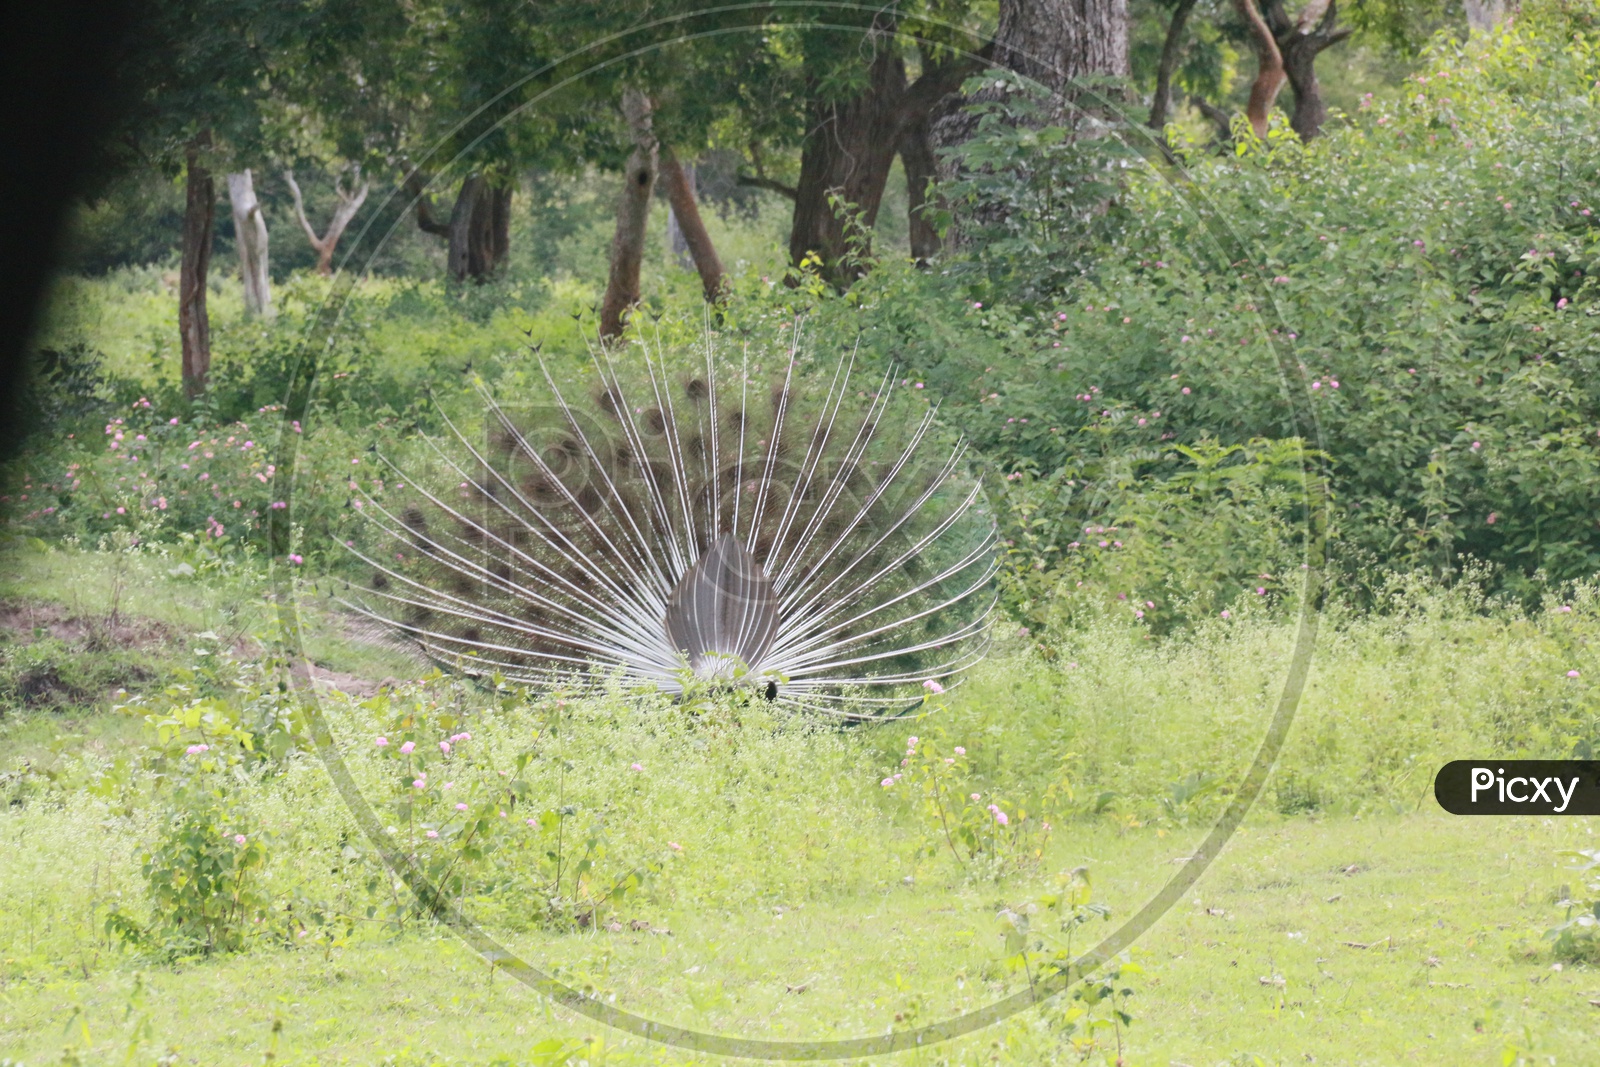 Indian Male Peacock Opened up His Feathers in a Forest Area